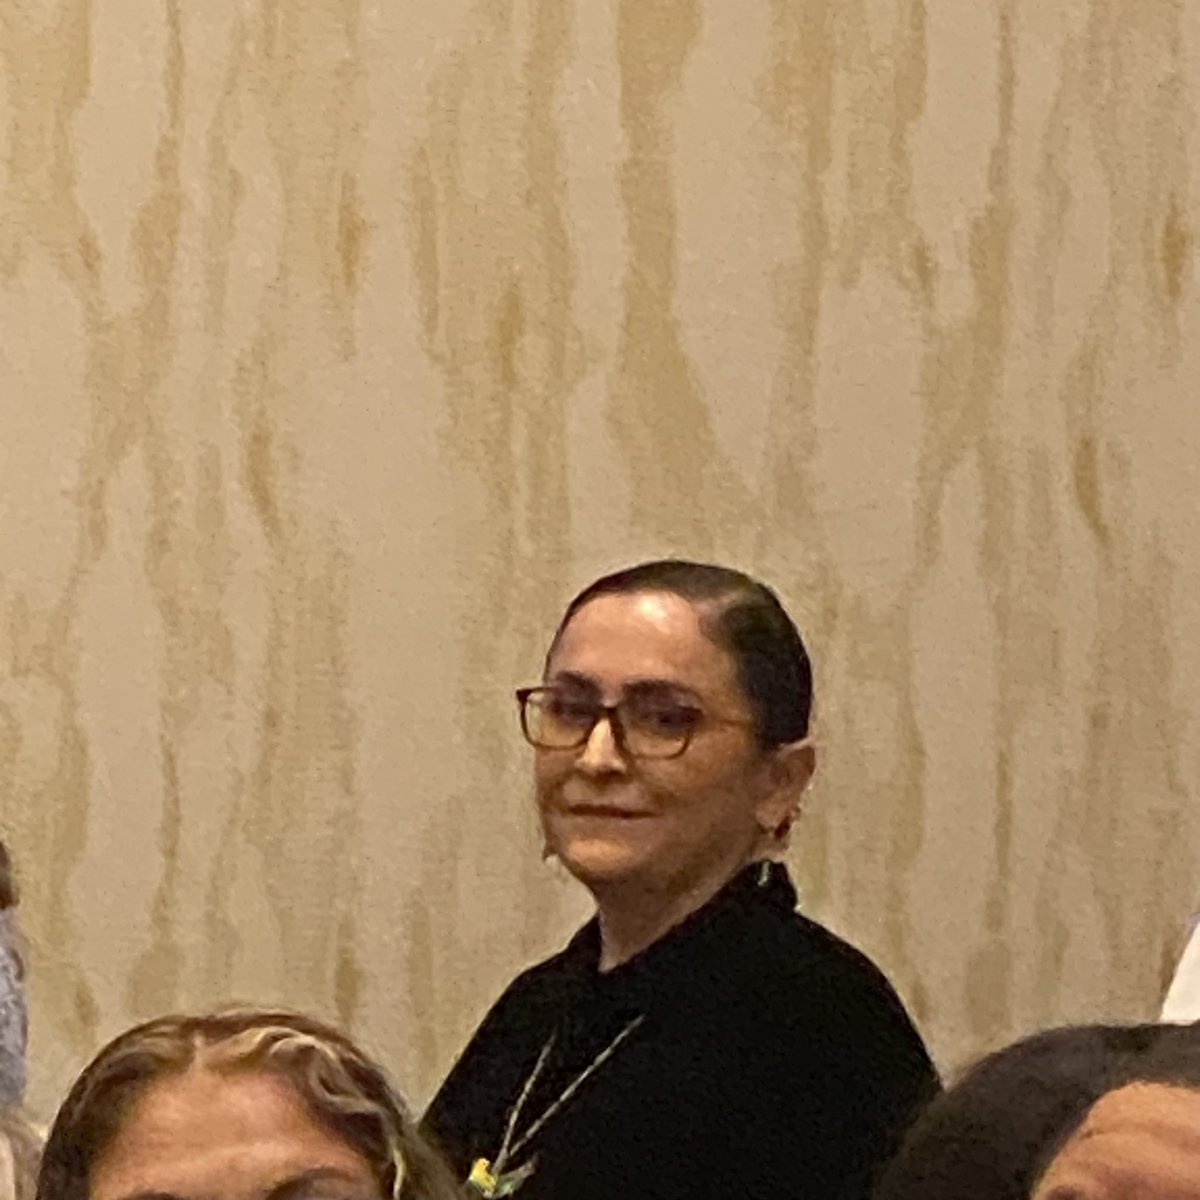 Congratulations to Ms. Rendon and Mrs. Habib for representing Garcia-Leza Primary at SHABE. They are amazing educators that bring out the best in all their students. Shine Bright! #KeepShiningGL @AldineISD